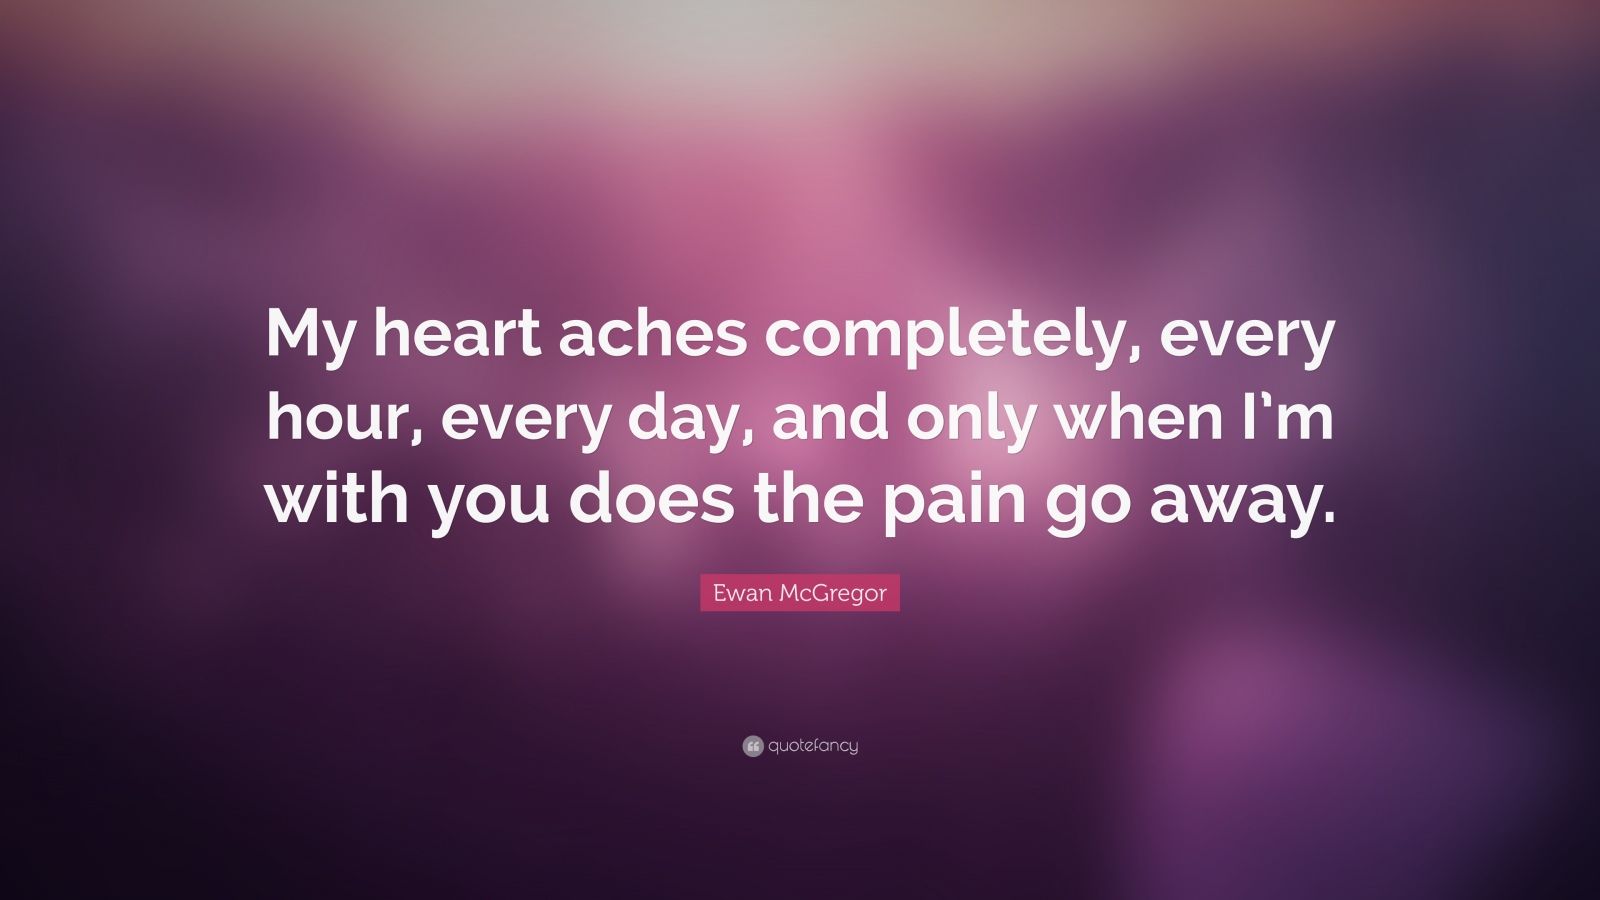 Ewan McGregor Quote: “My heart aches completely, every hour, every day ...